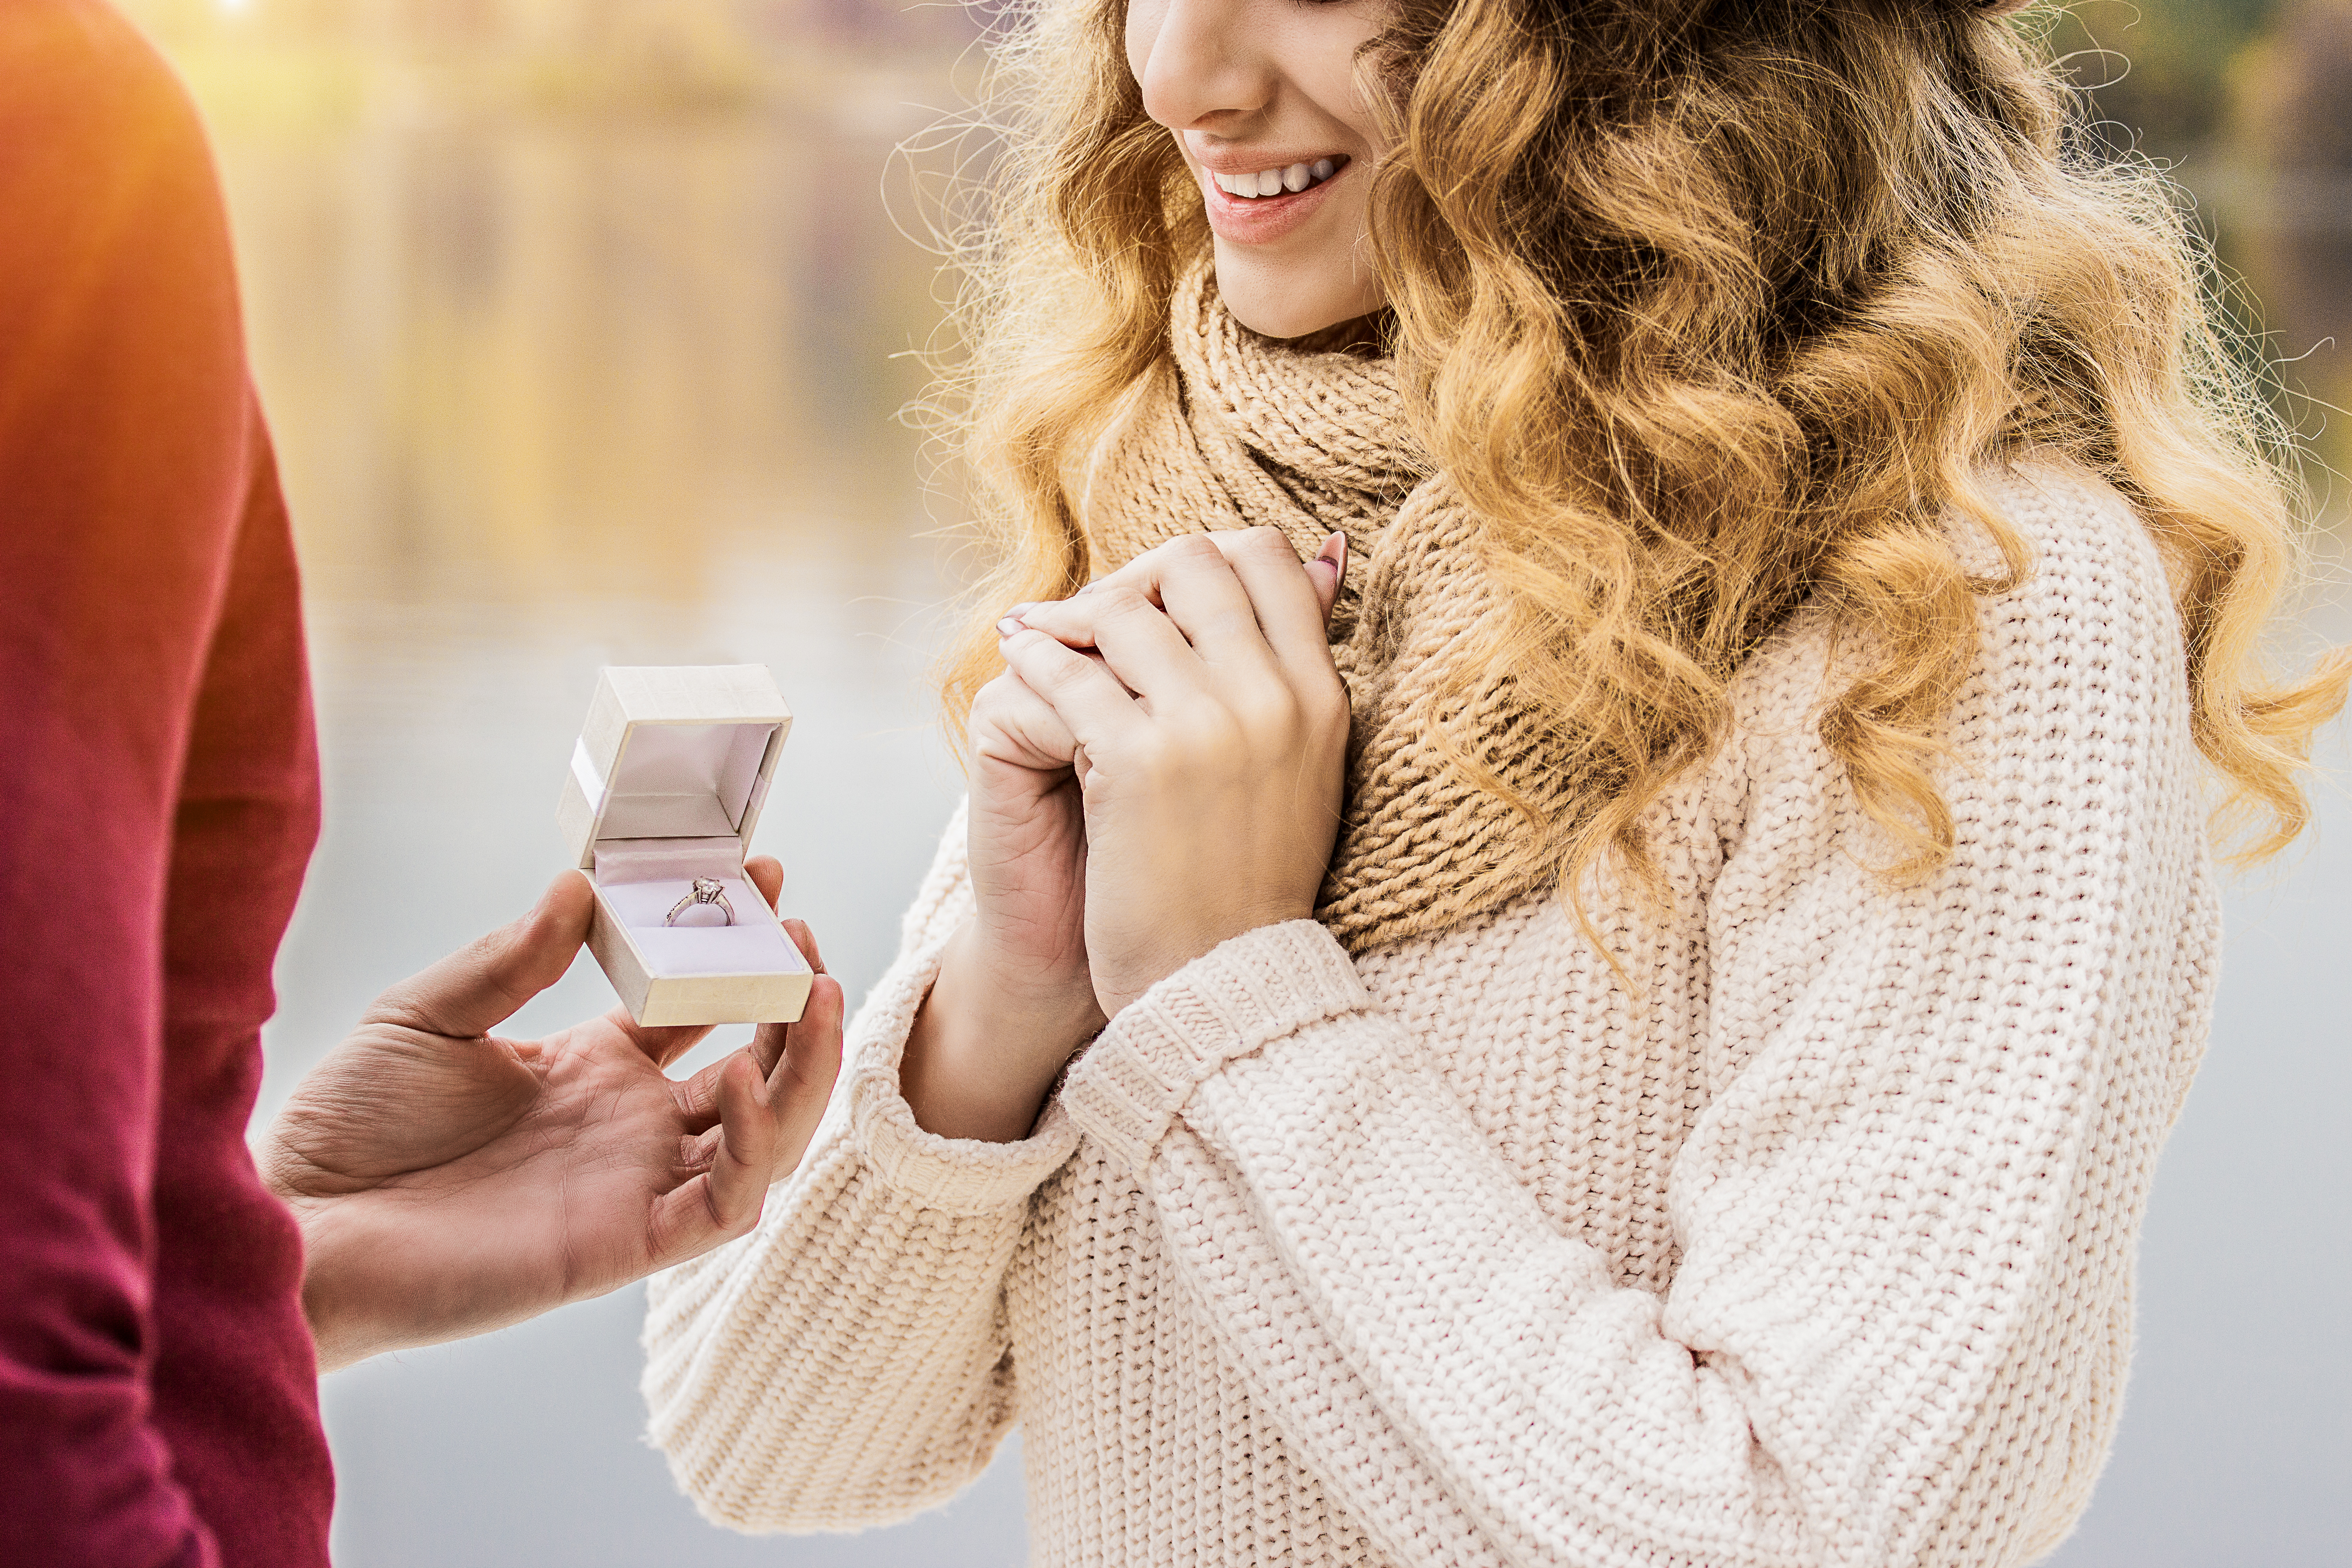 A cropped image of a young man proposing to his girlfriend | Source: Shutterstock